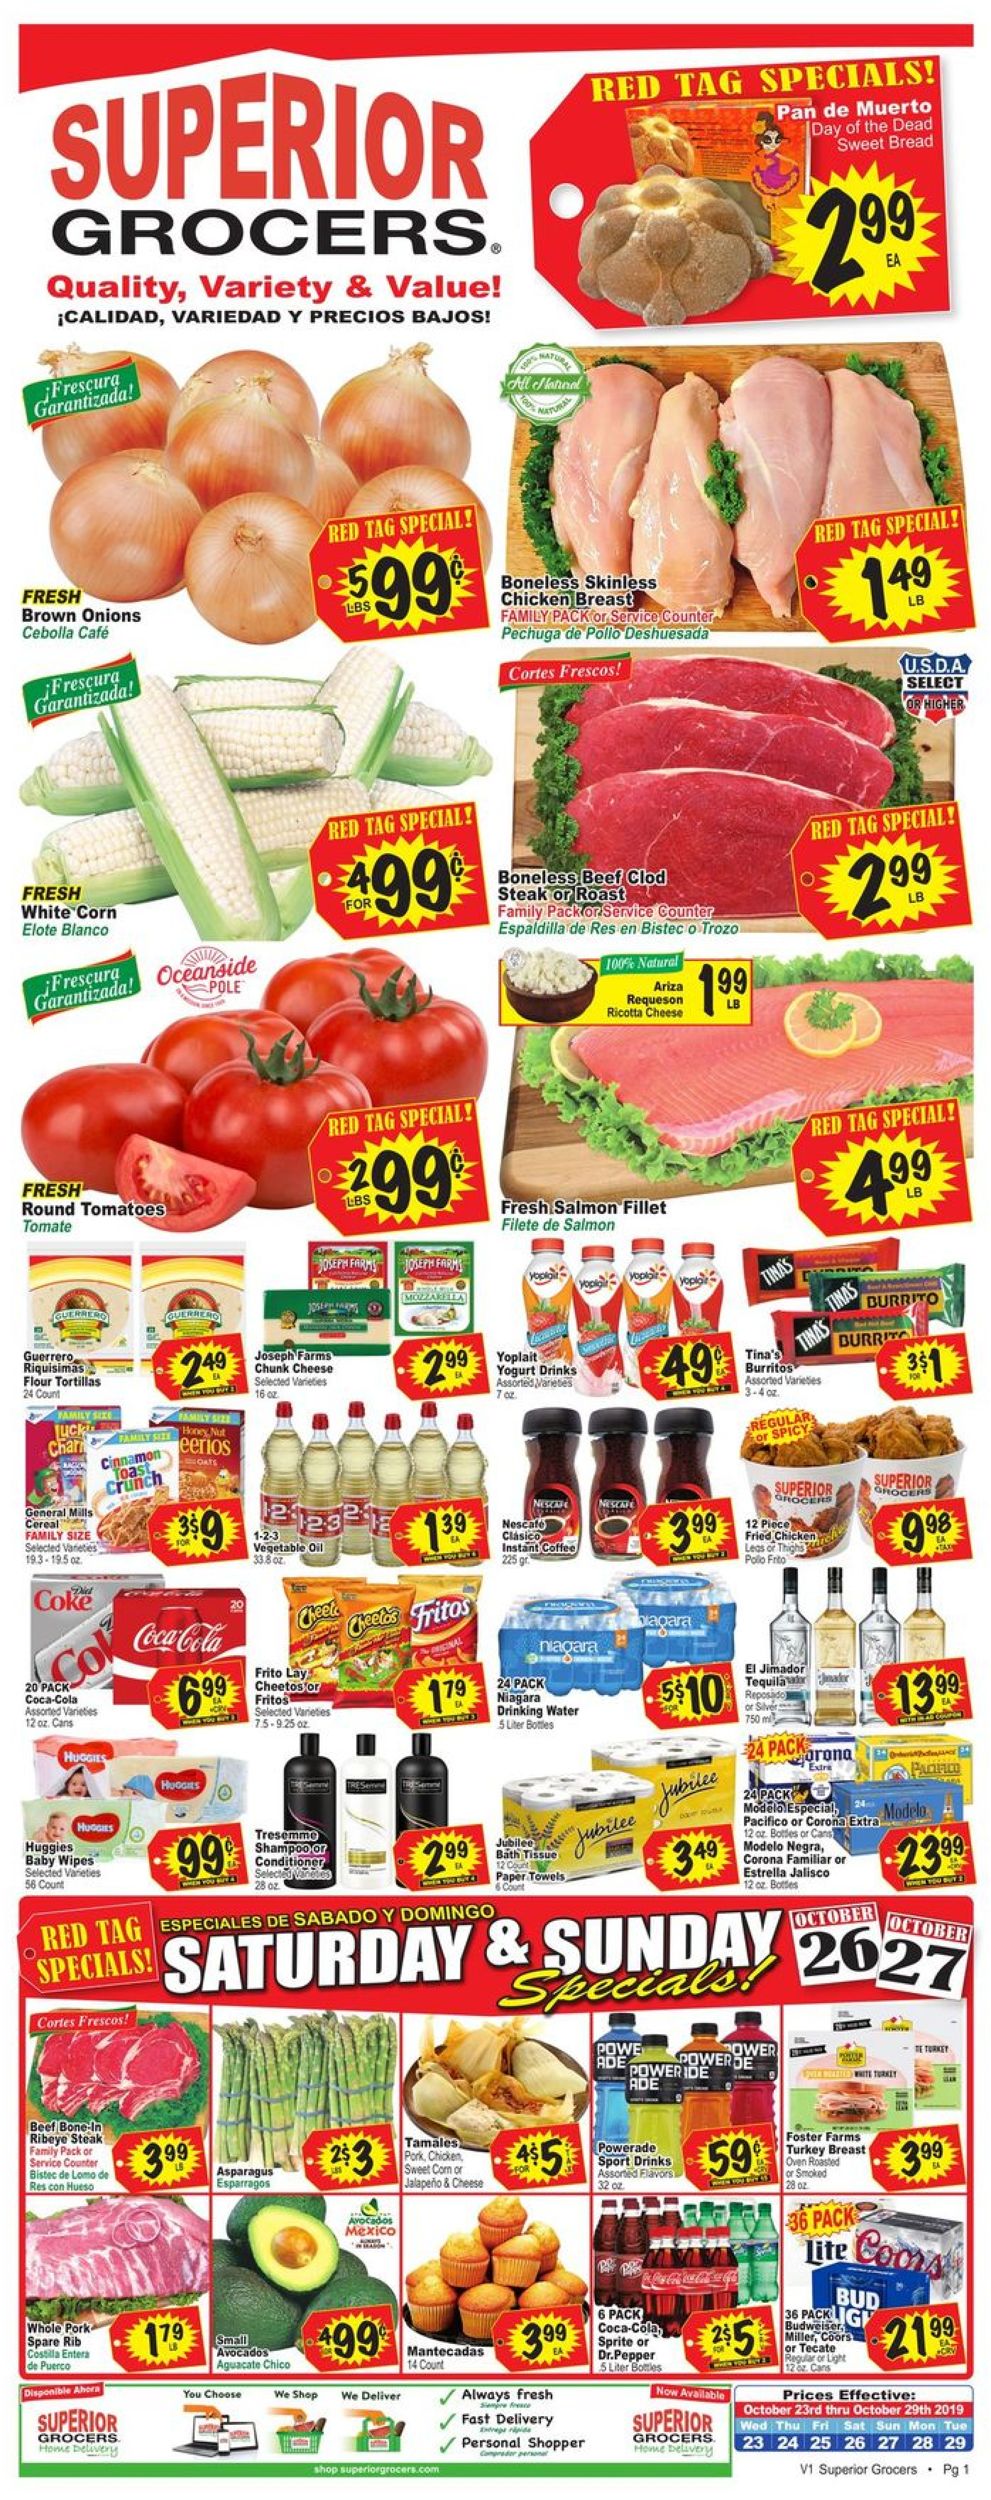 Superior Grocers Current weekly ad 10/23 - 10/29/2019 - frequent-ads.com